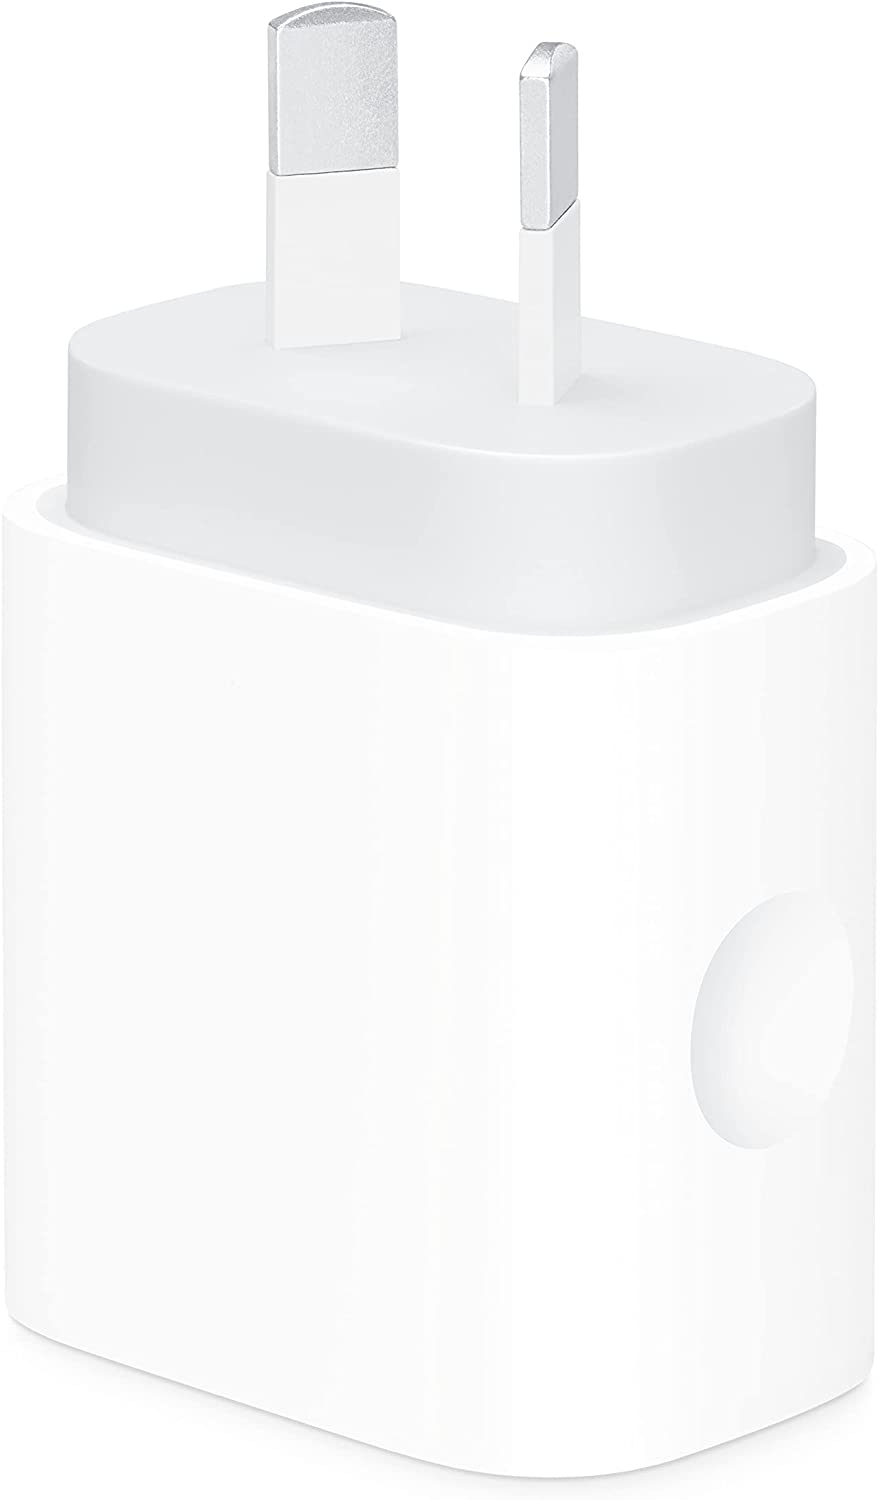 APPLE Power Adapters & Chargers MHJ93X/A